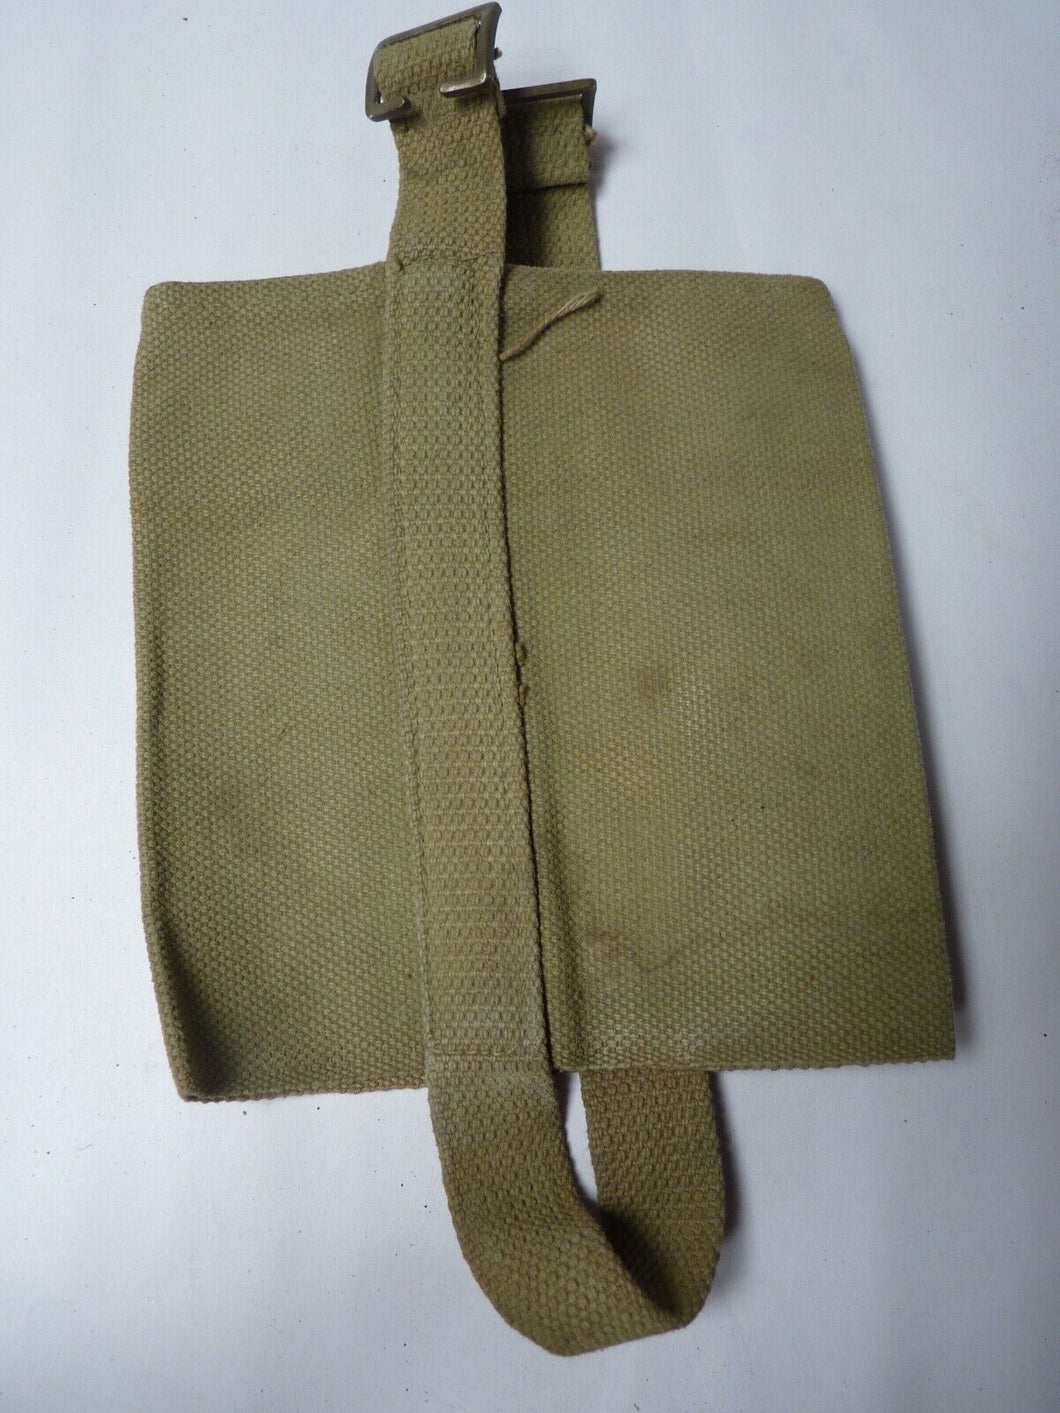 Original WW2 British Army Soldiers Water Bottle Carrier Harness - Dated 1944